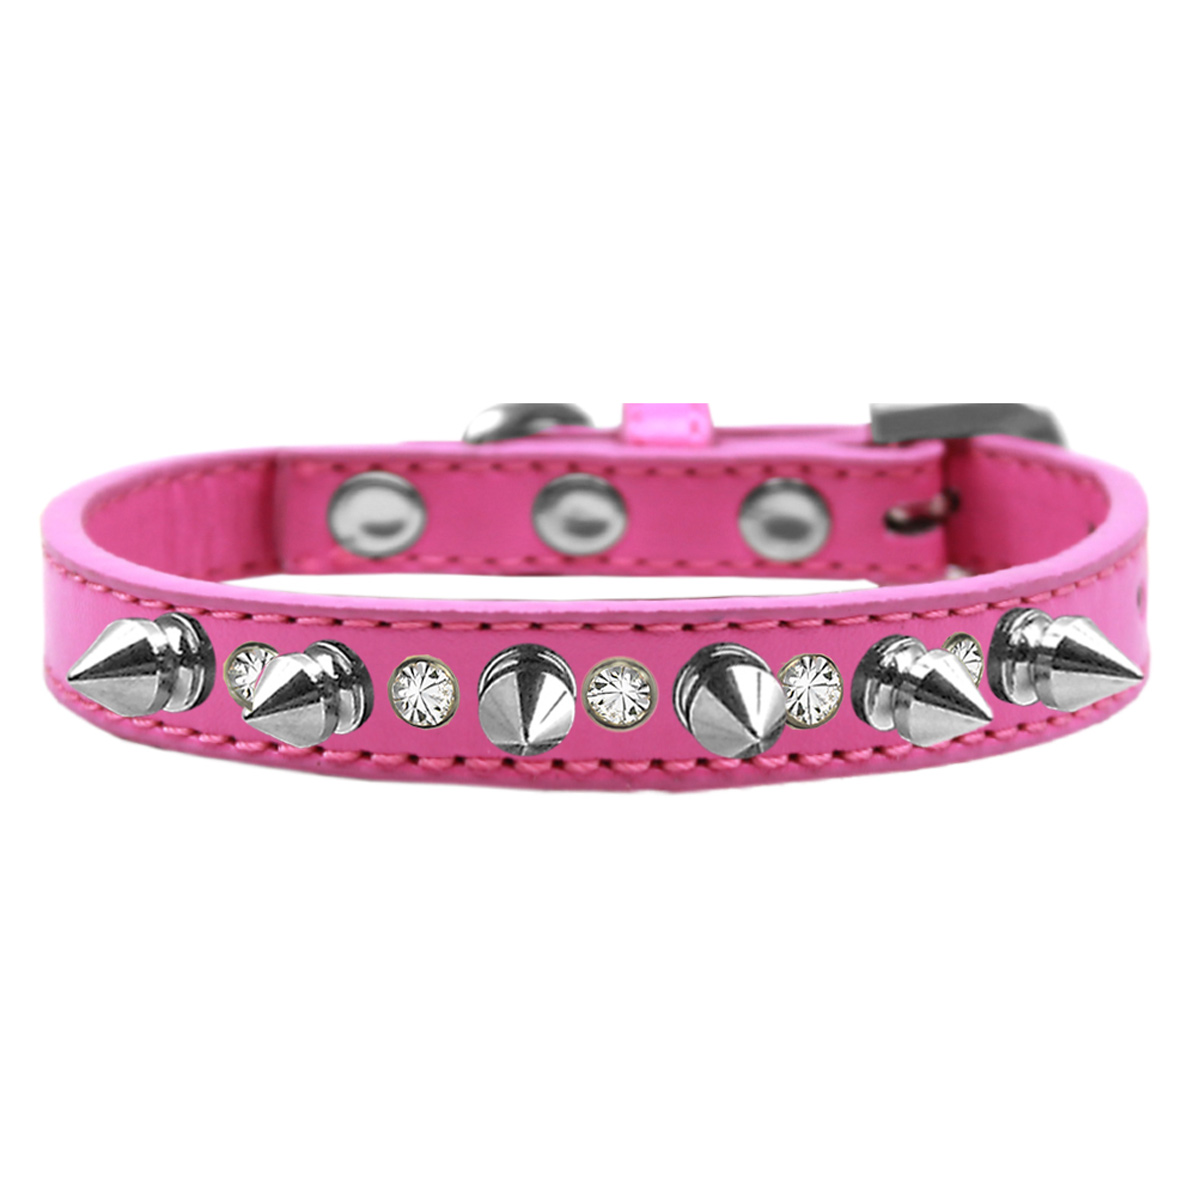 Crystals and Silver Spikes Dog Collar - Bright Pink